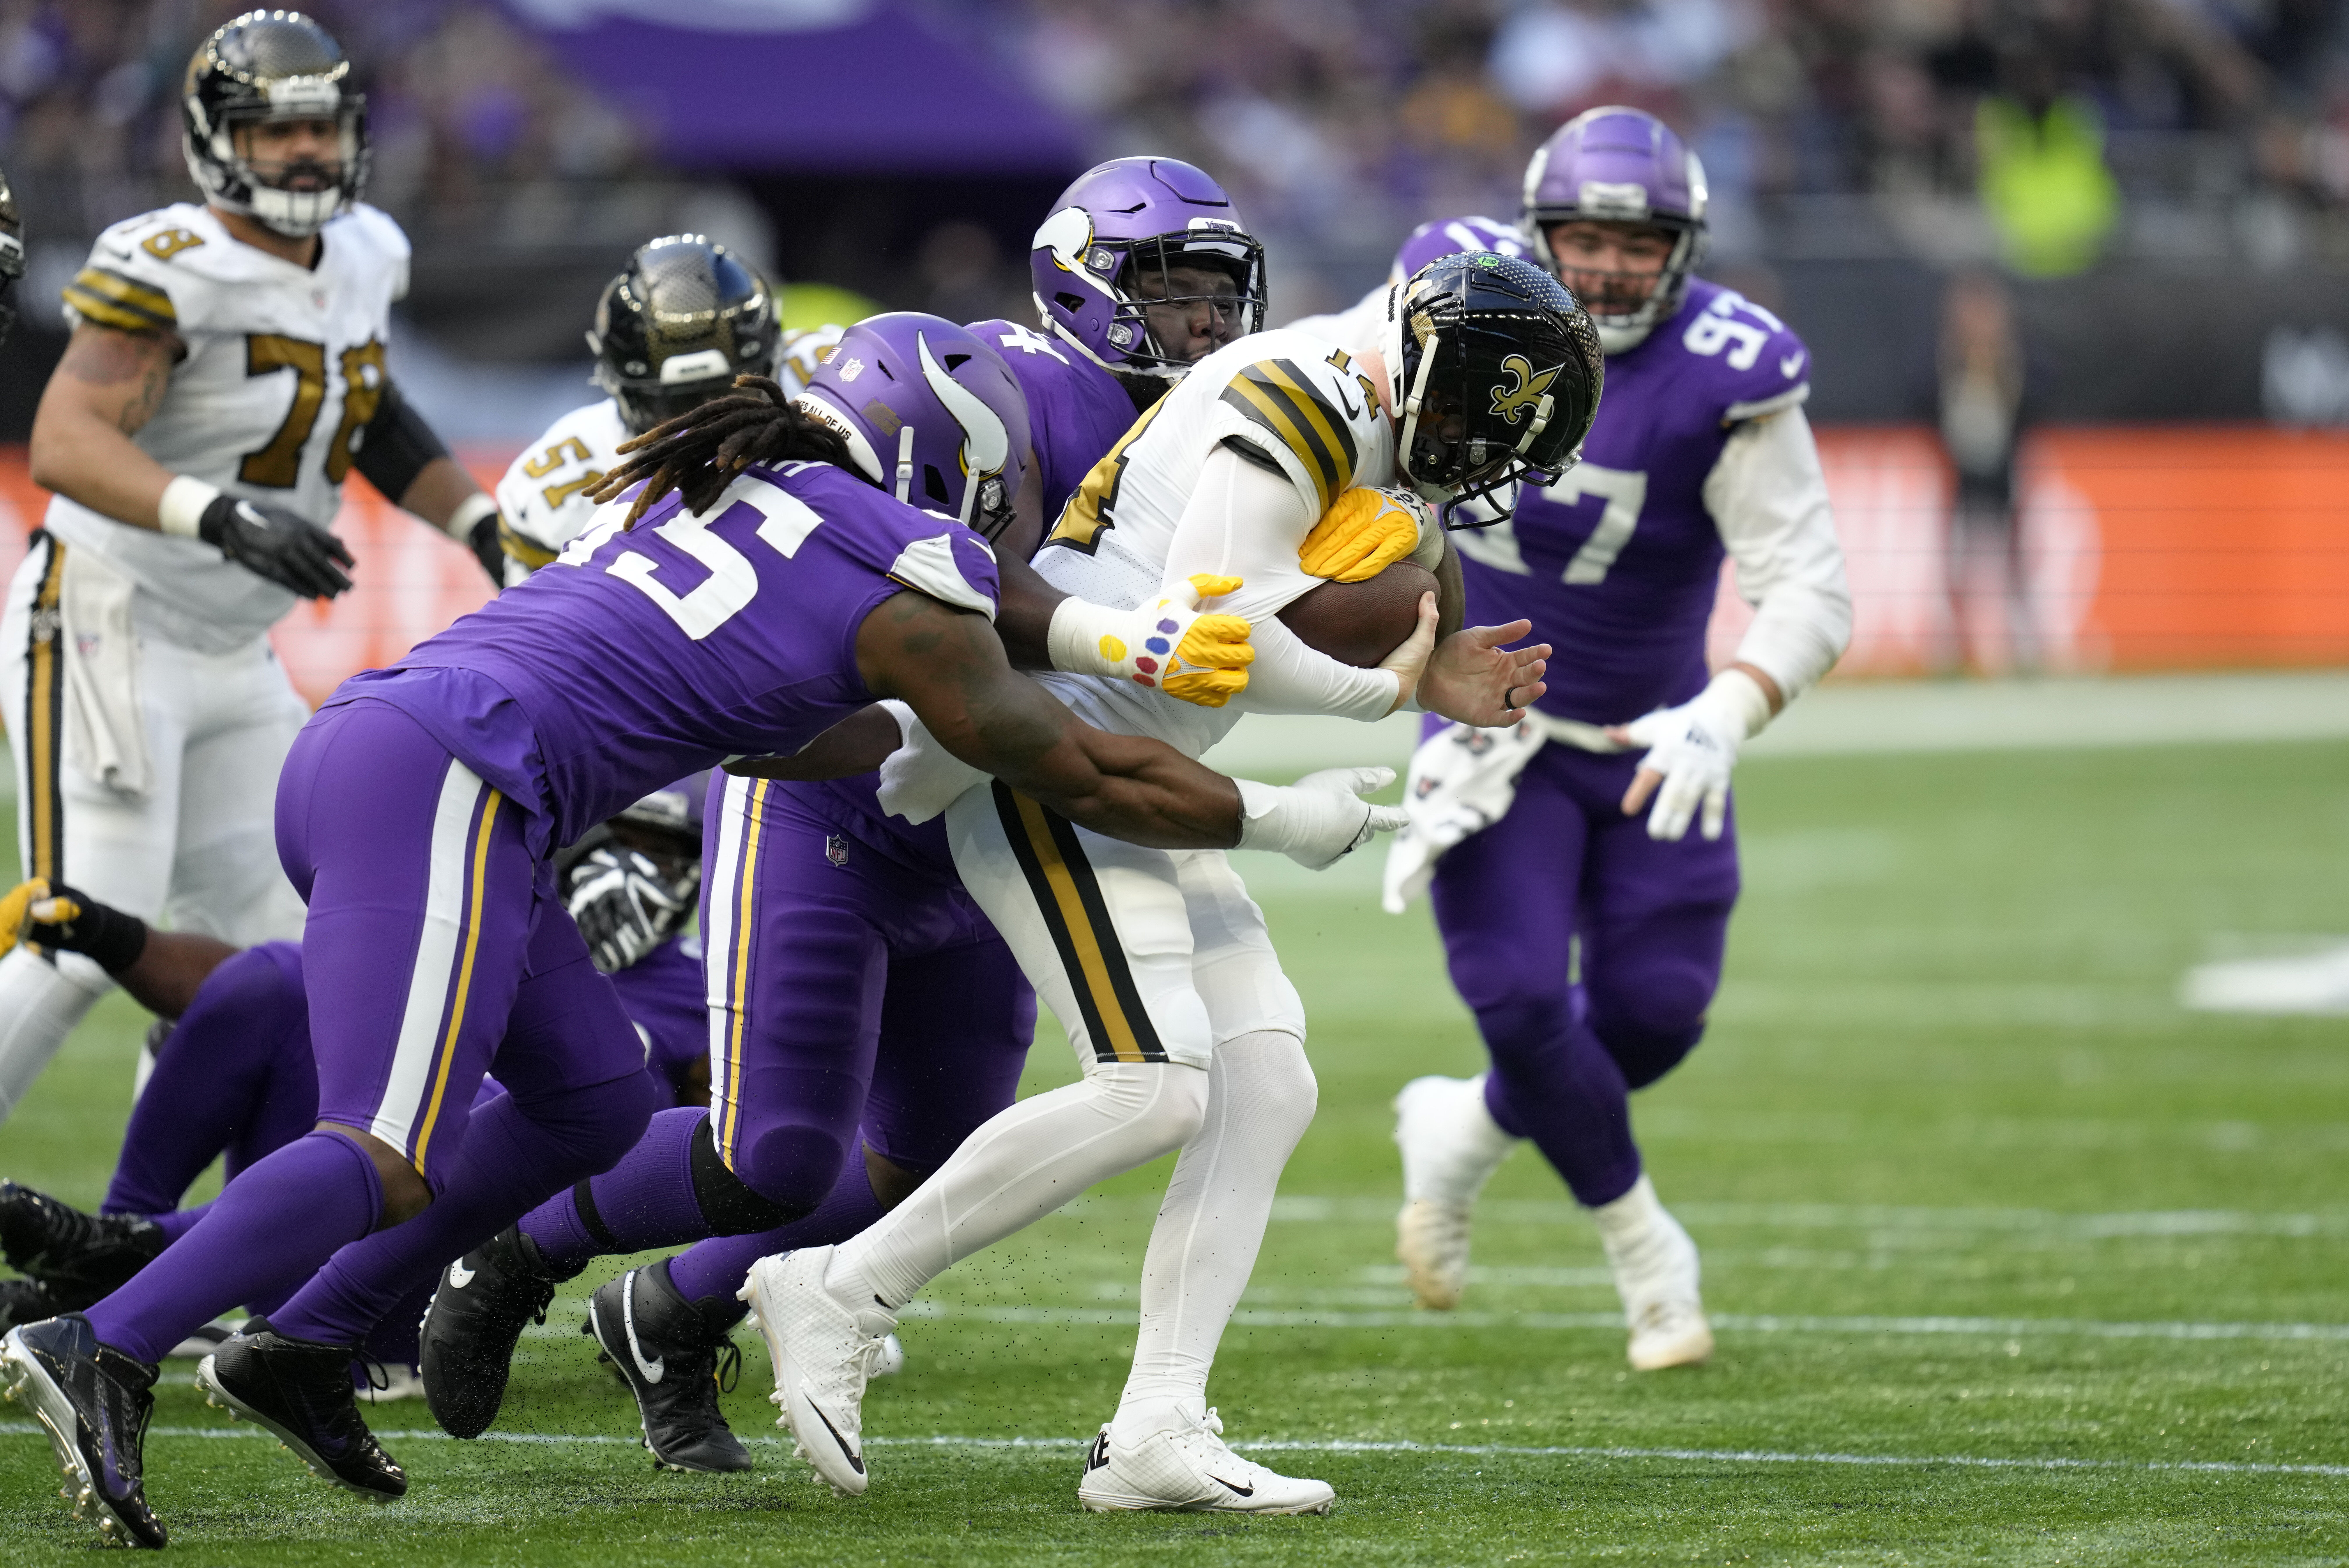 <p><b><i>Vikings 28</i></b><br />
<b><i>Saints 25</i></b></p>
<p><a href="https://profootballtalk.nbcsports.com/2022/10/01/kirk-cousins-andy-dalton-meet-again-in-london-after-2016-tie/" target="_blank" rel="noopener">Kirk Cousins and Andy Dalton really tried to give us another London tie</a>, but we can rest assured these two will somehow meet again across the pond with Dalton evening things out to make both perennially mediocre QBs 1-1-1 in London.</p>
